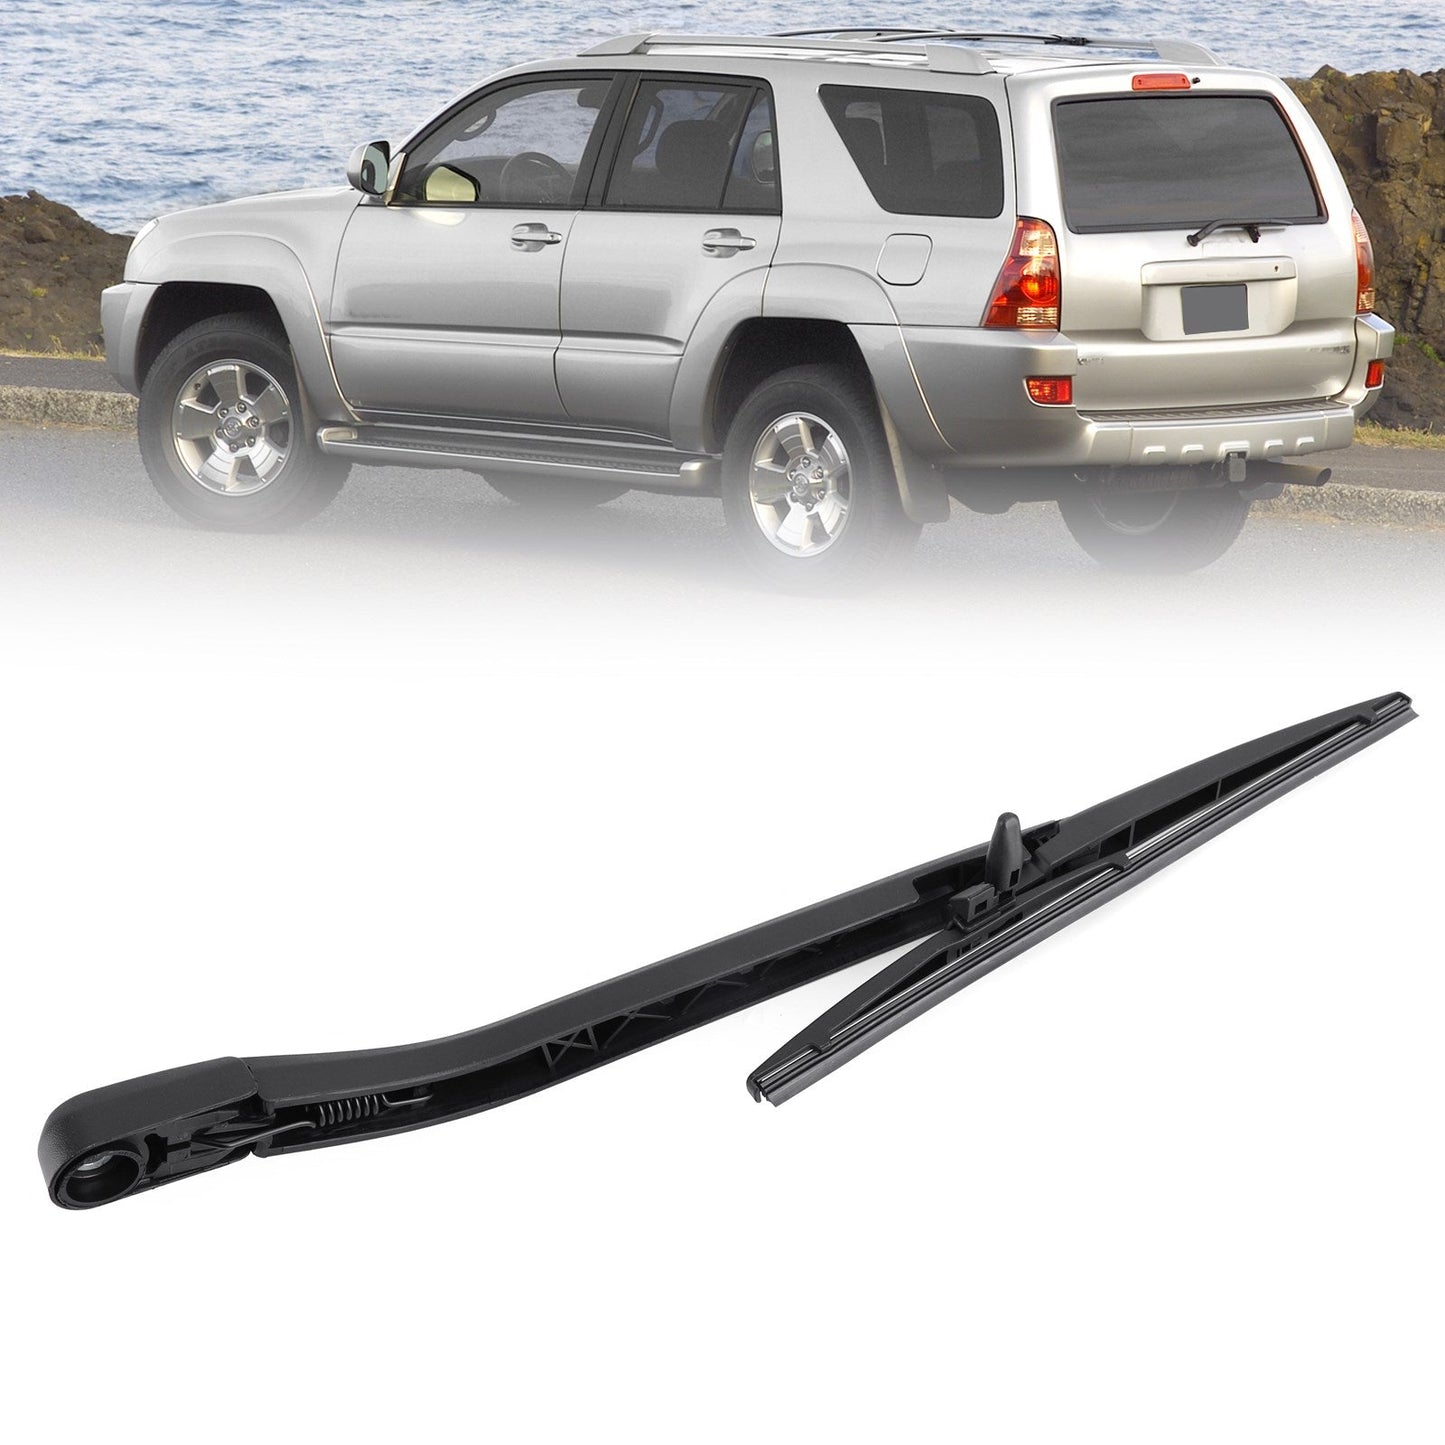 2PCS Rear Windshield Wiper Arm & Blade Fit For Toyota 4Runner 2003-2009 85242-35021